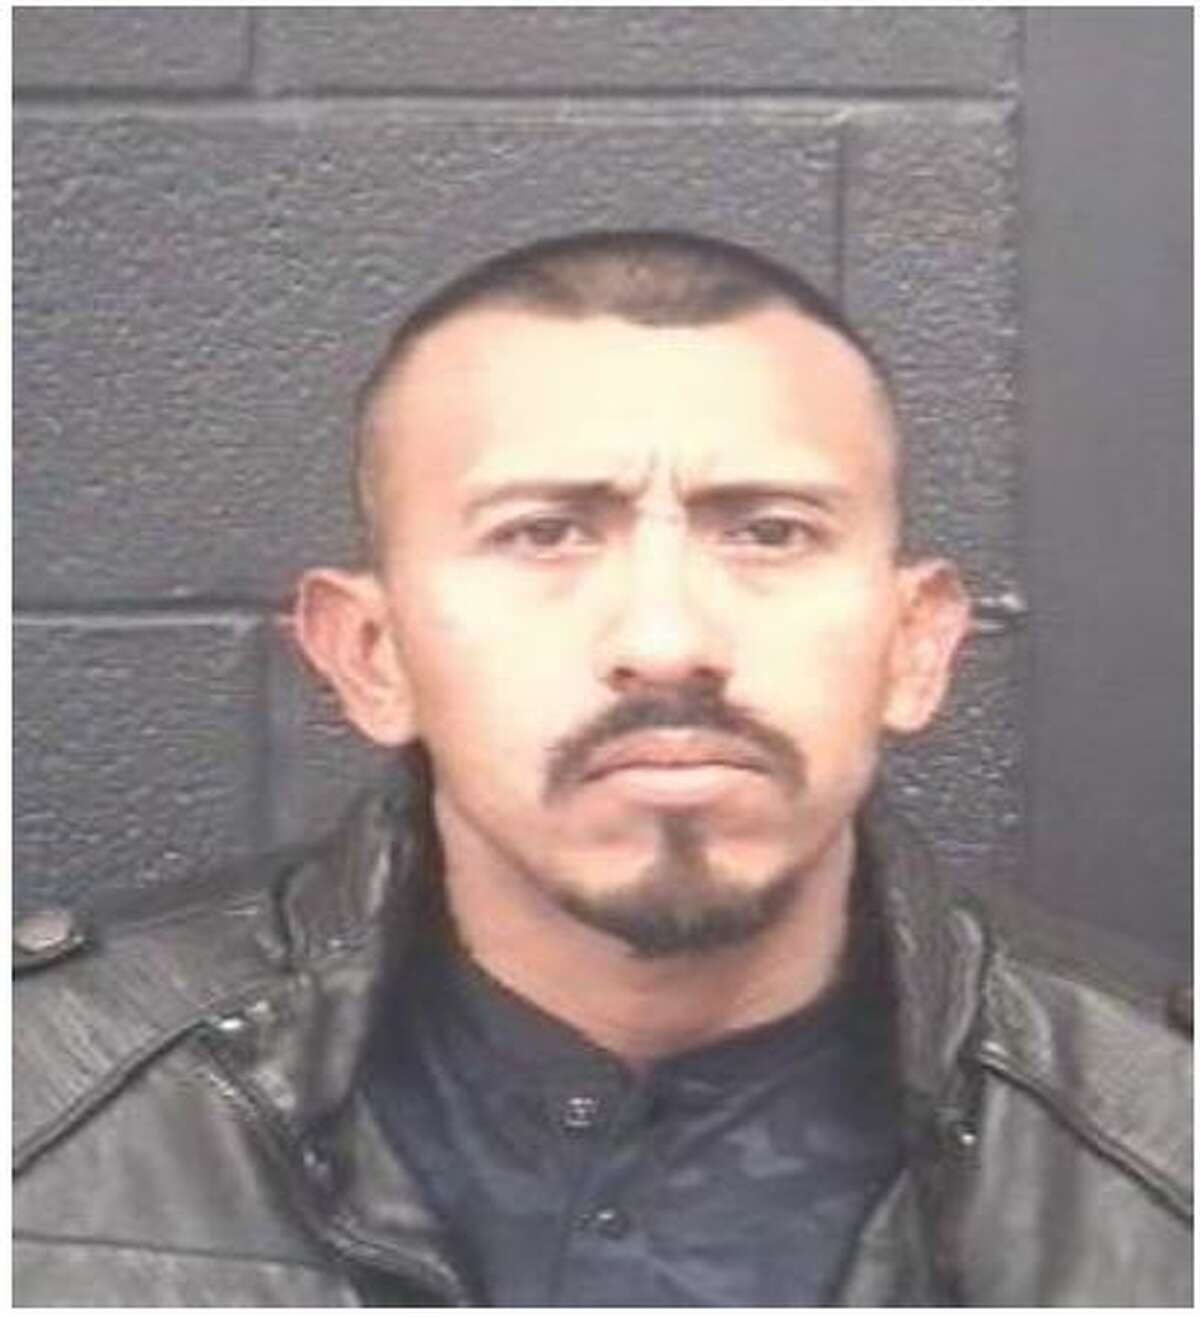 Gerardo De Angel Chavez was charged with driving while intoxicated and having an open alcohol container.